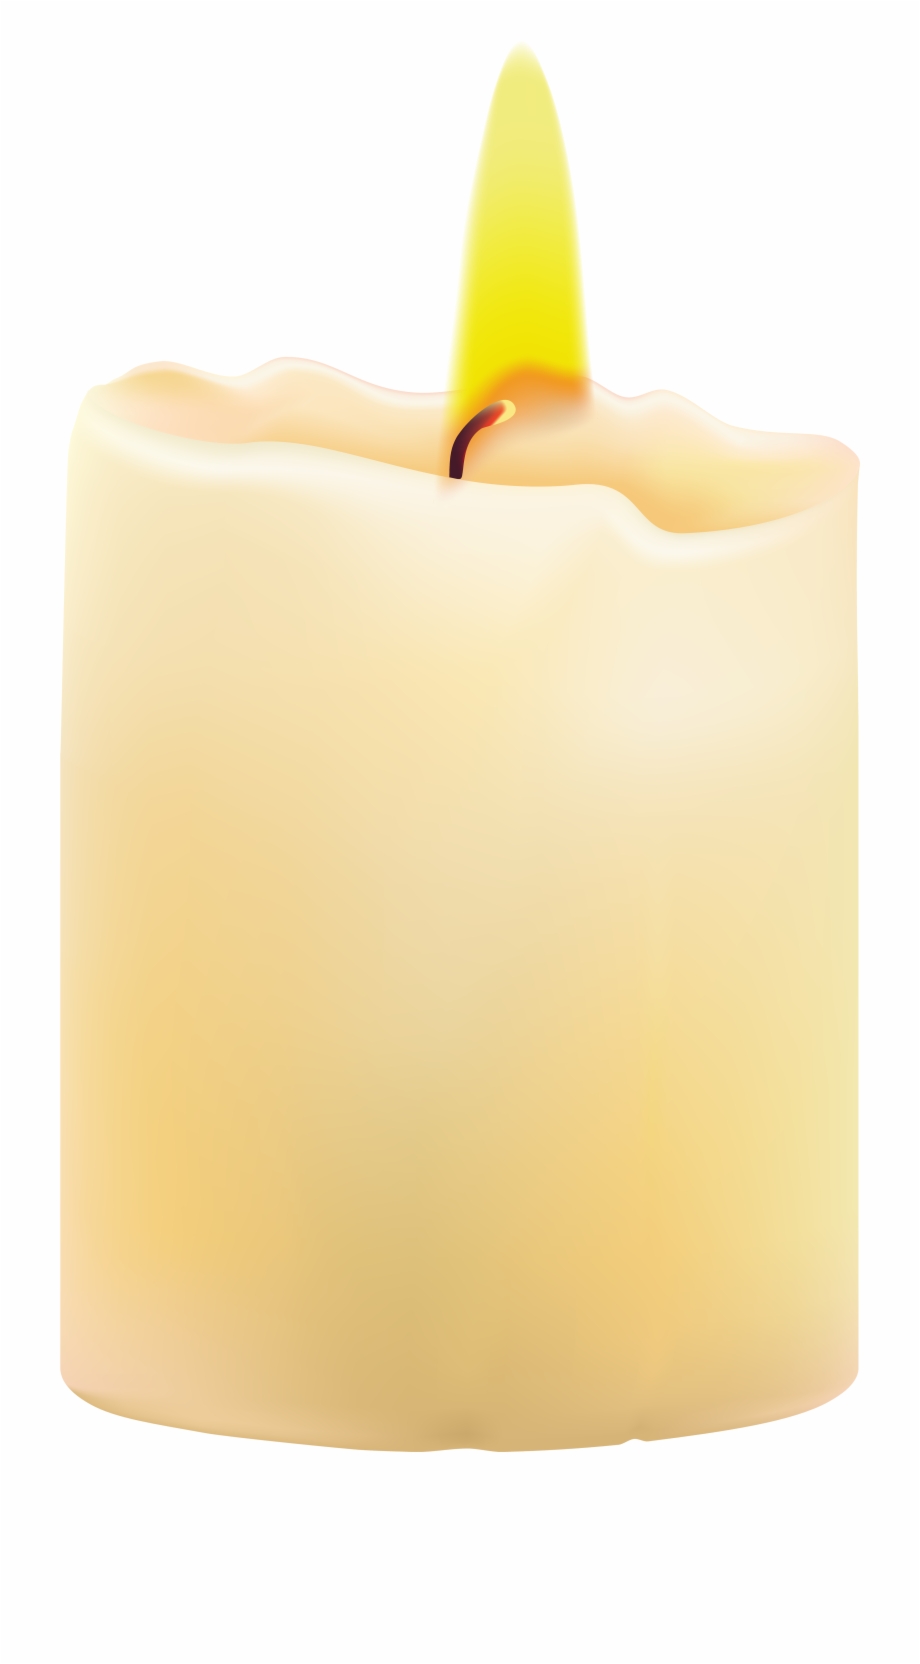 Candles clipart transparent background. Wax candle clip art